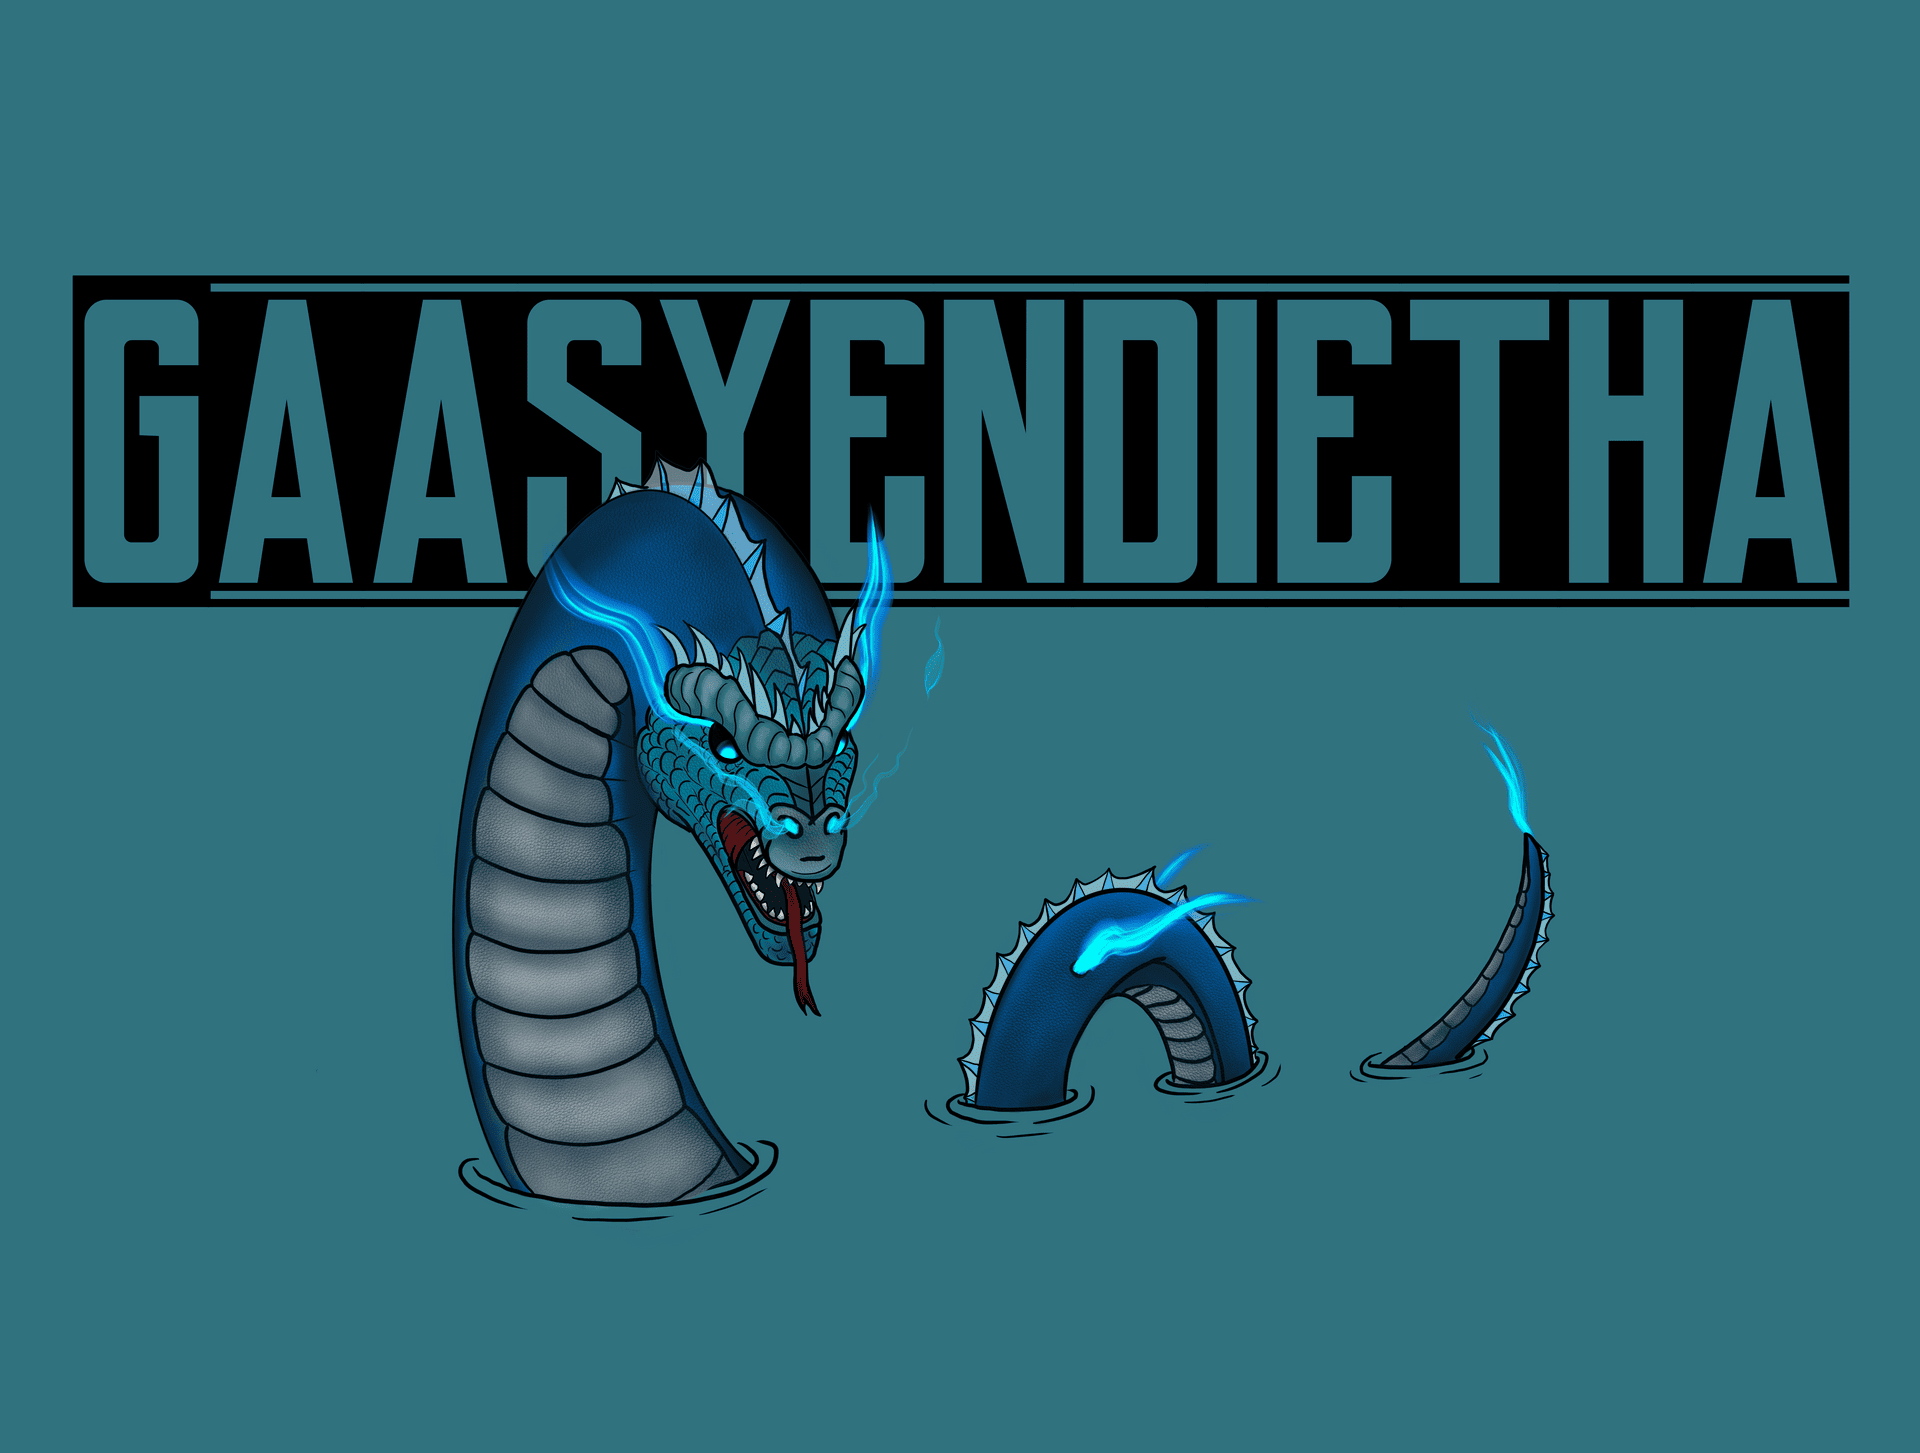 A digital illustration of Gaasyendietha emerging from a solid water-coloured background